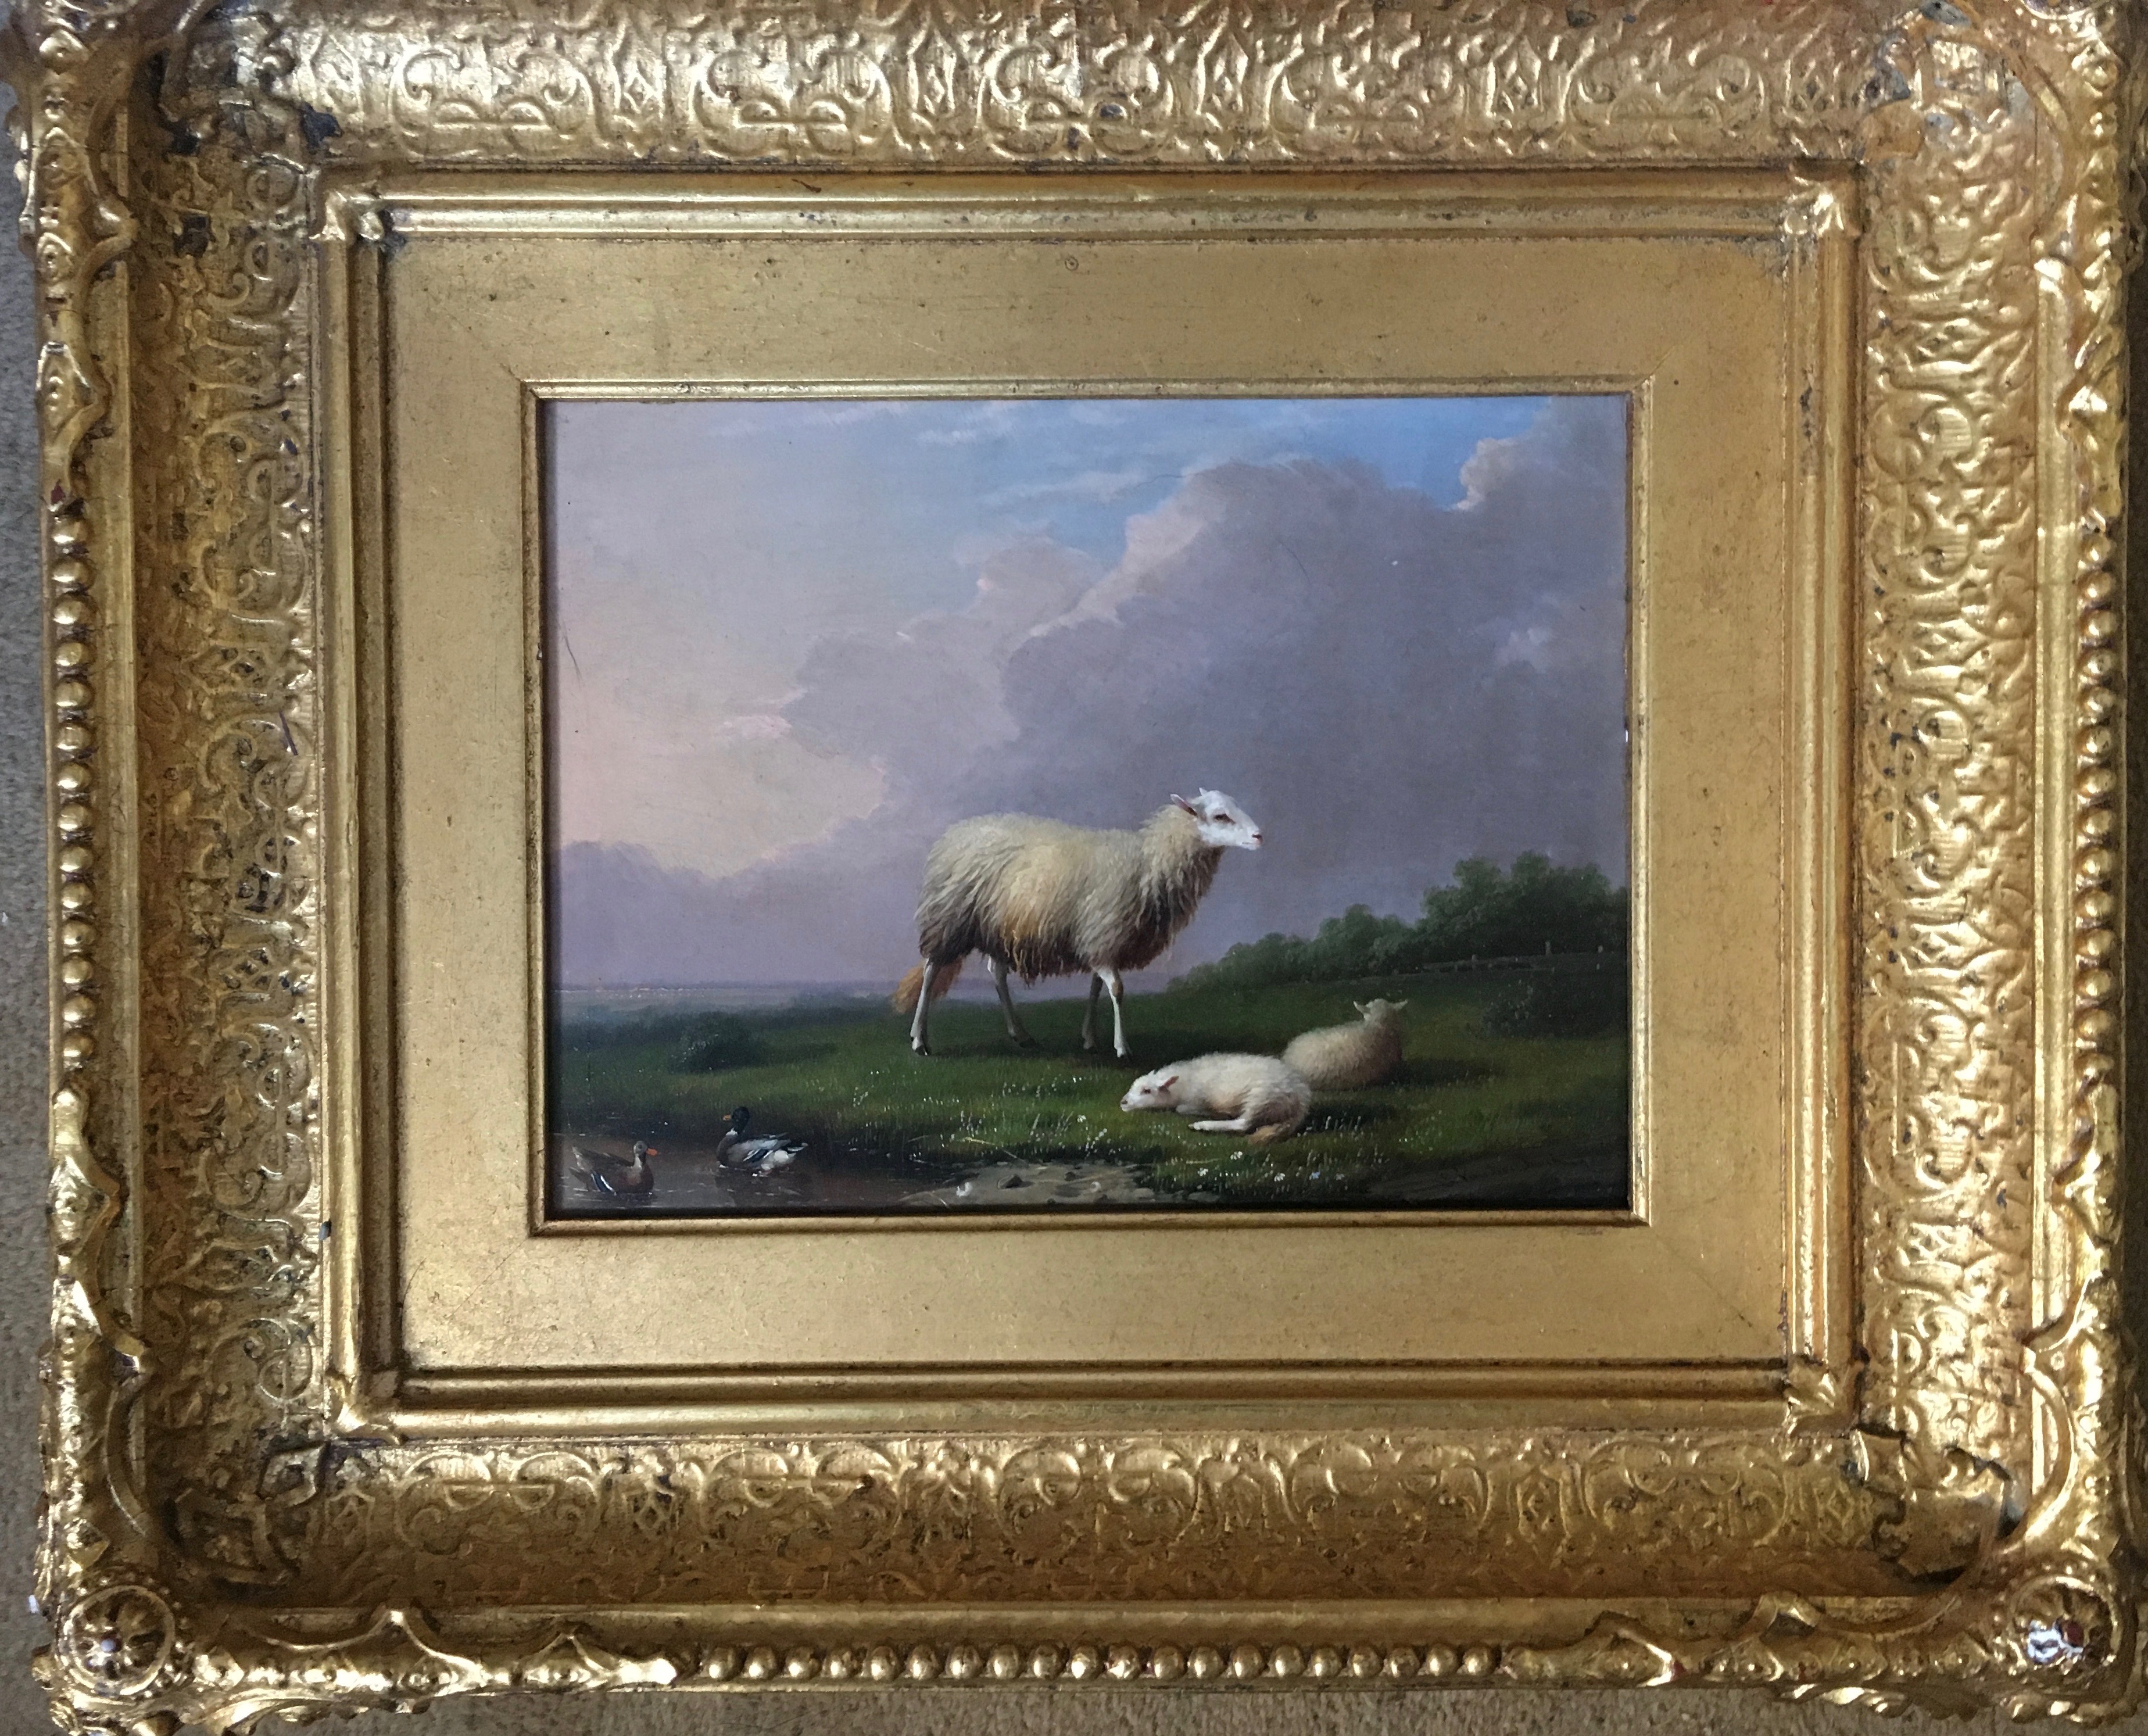 Good quality 19th c oil on board of sheep in a landscape signed lr in the manner of Eugene